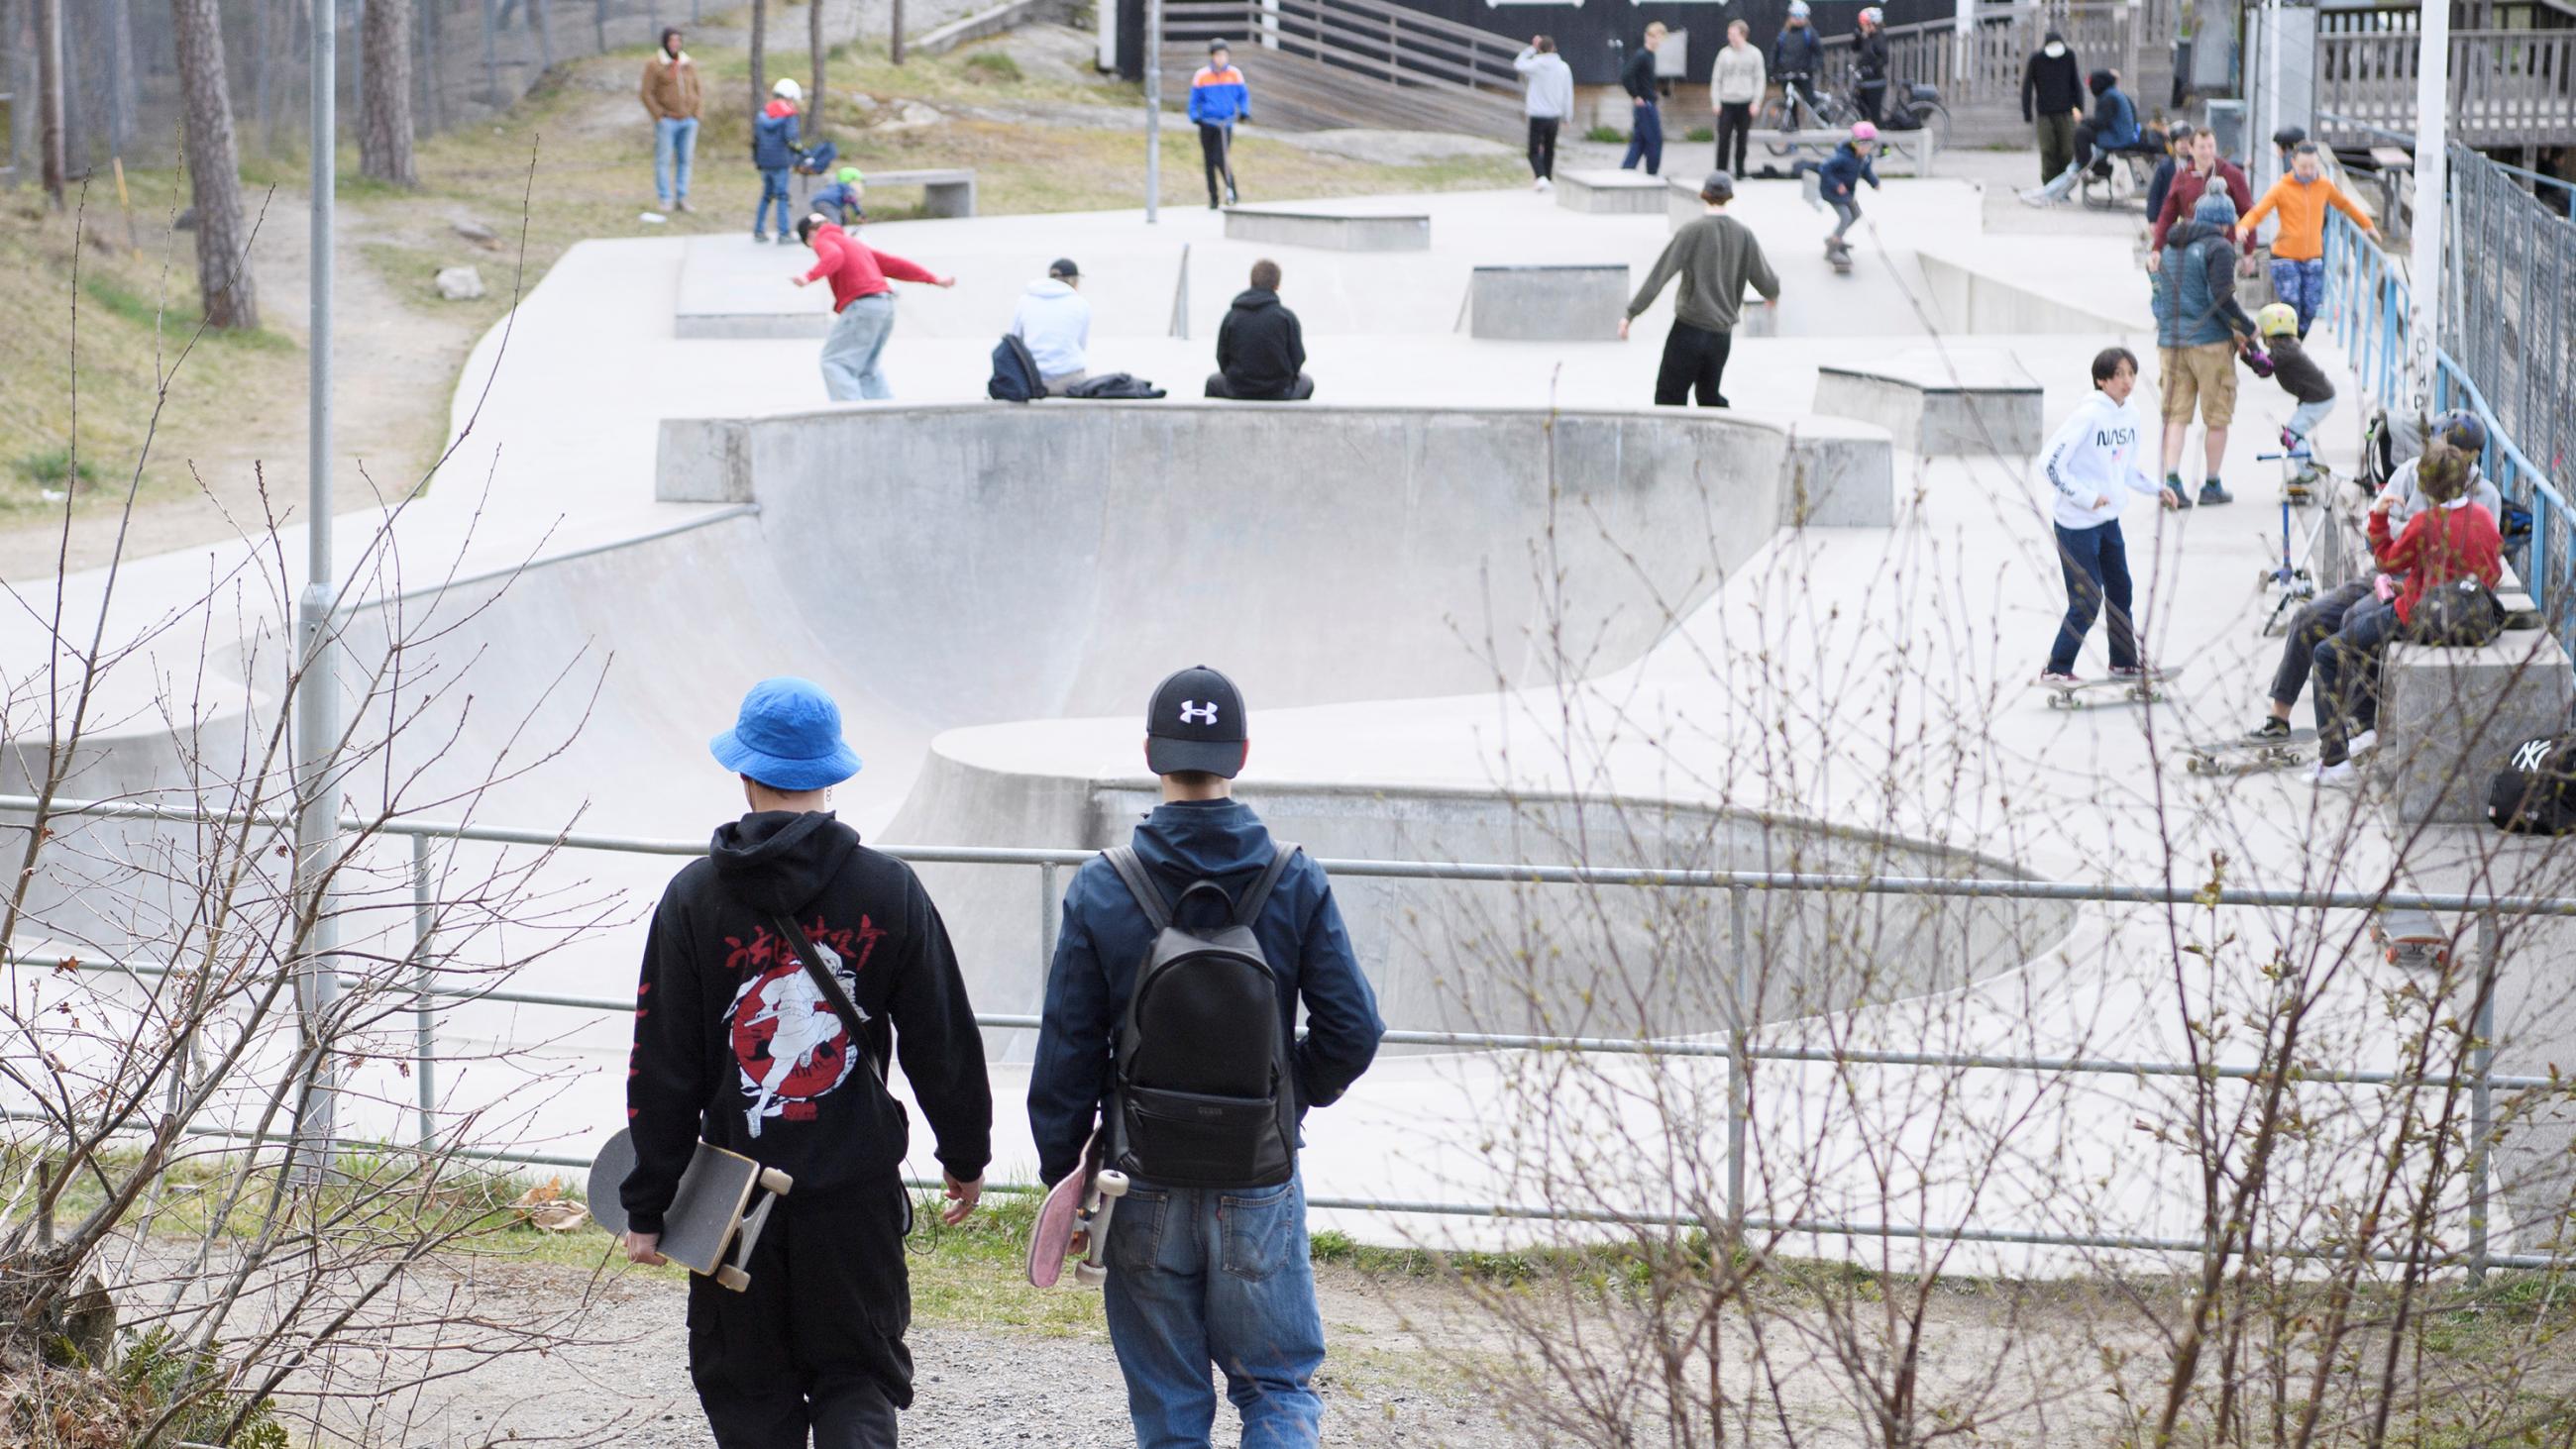  The photo shows a skateboard park that appears to be business as usual. 